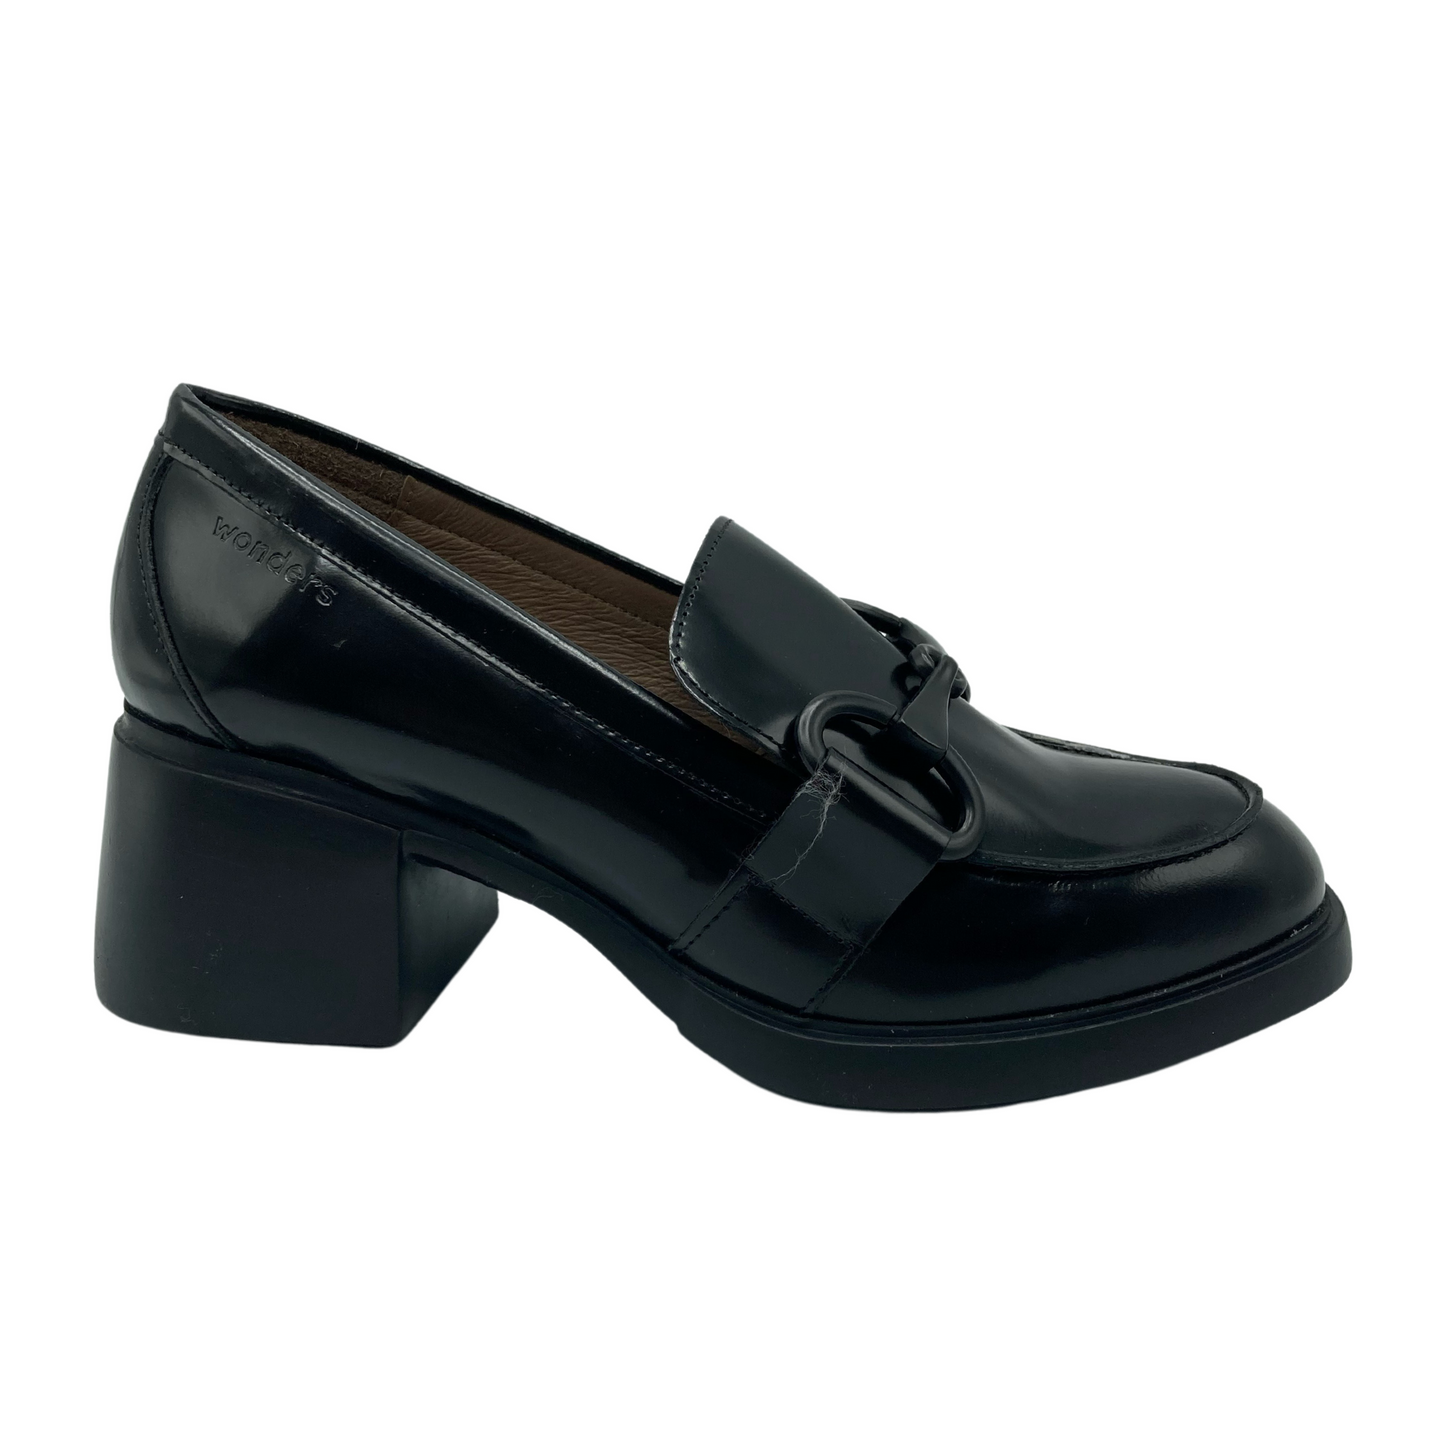 Side view of black glossy leather loafer with black rubber heel